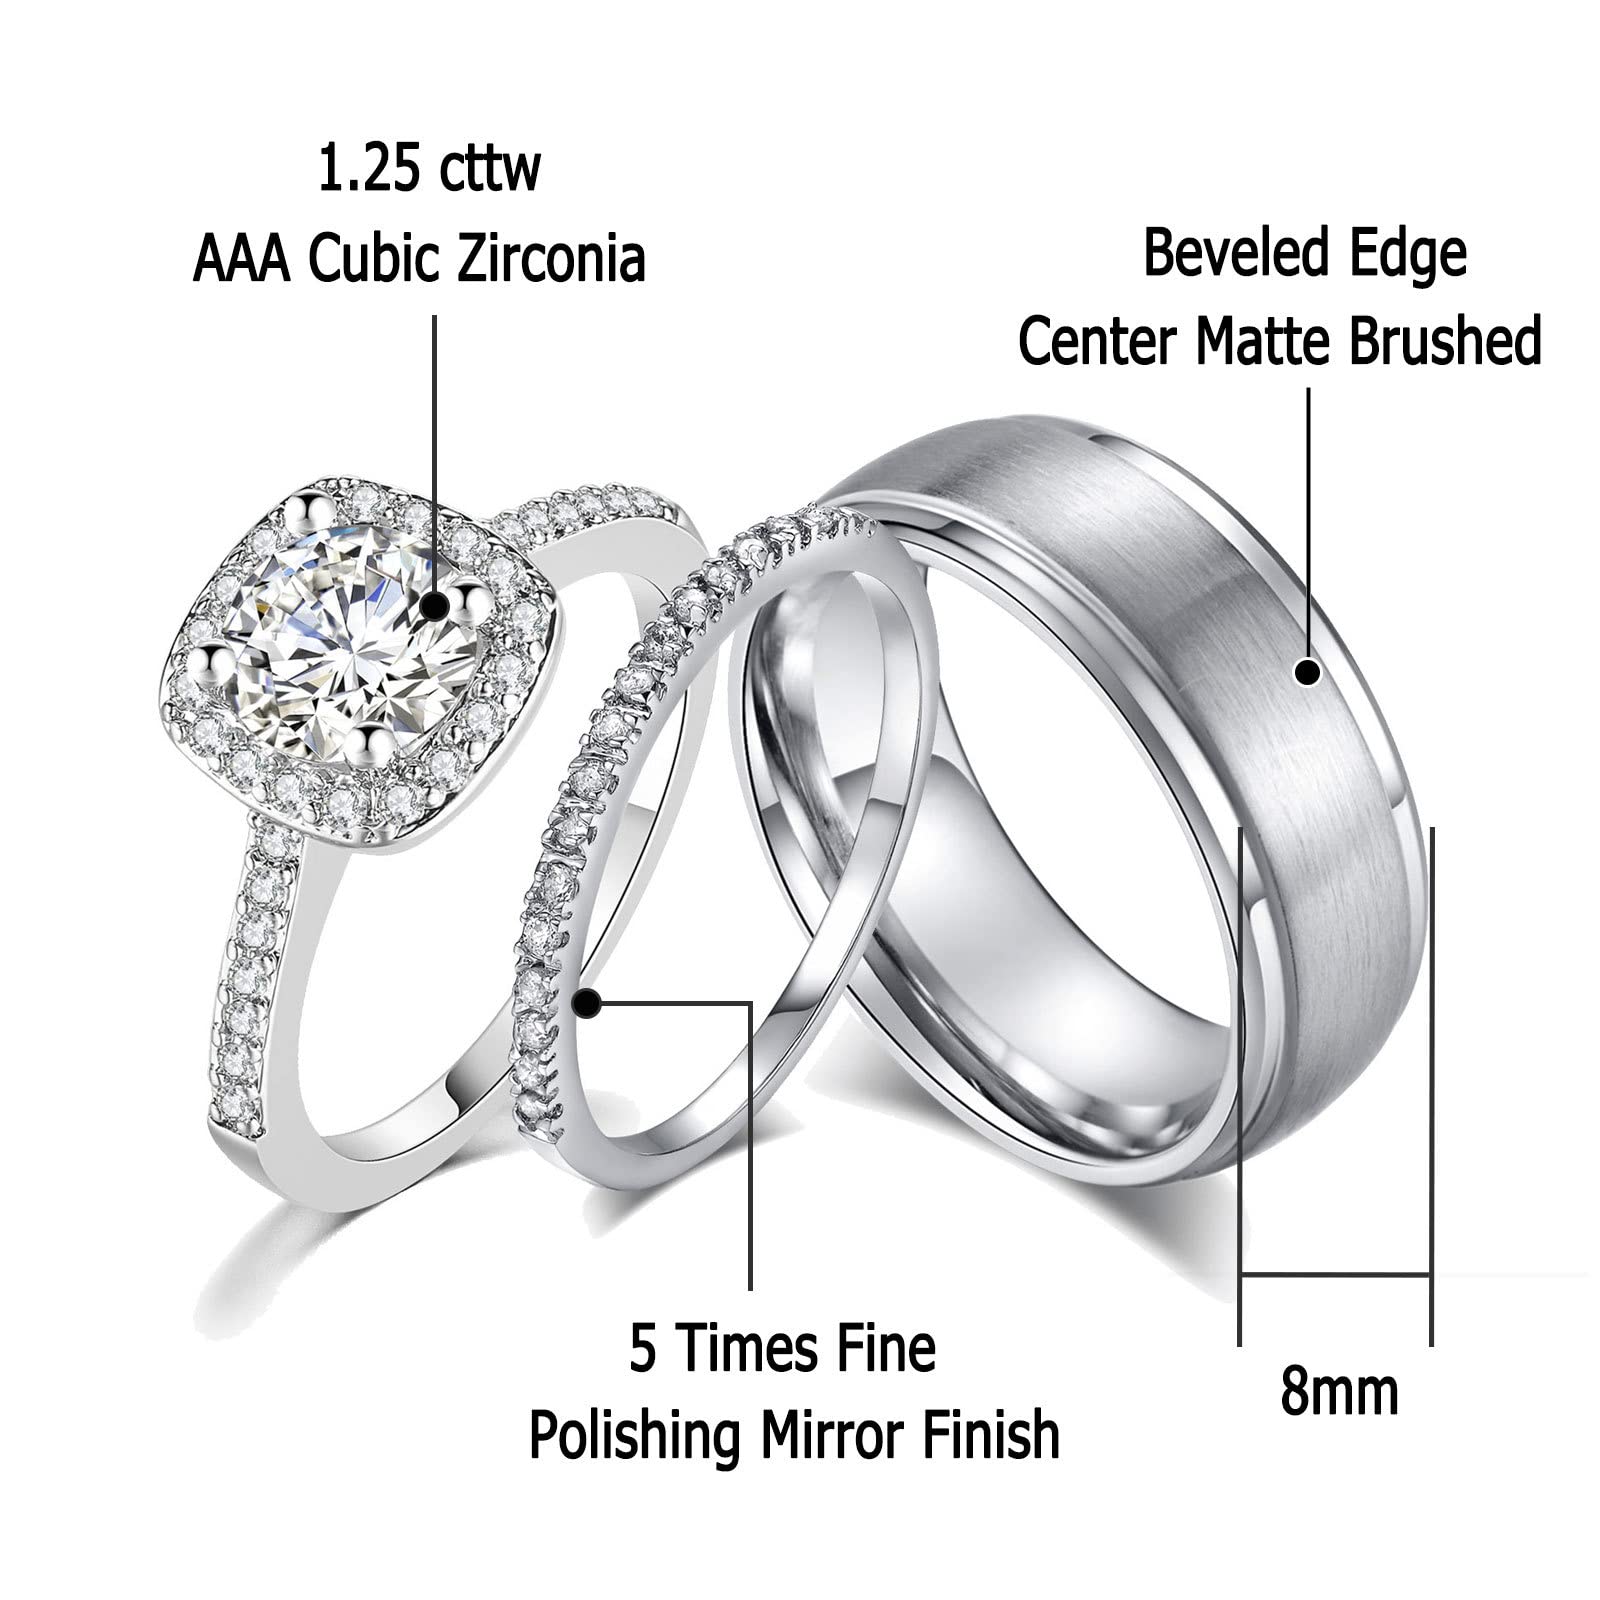 Ahloe Jewelry 18k Gold Wedding Ring Sets for Him and Her Womens Mens Titanium Stainless Steel Rings Bands 1.5Ct Cz White Couple Rings